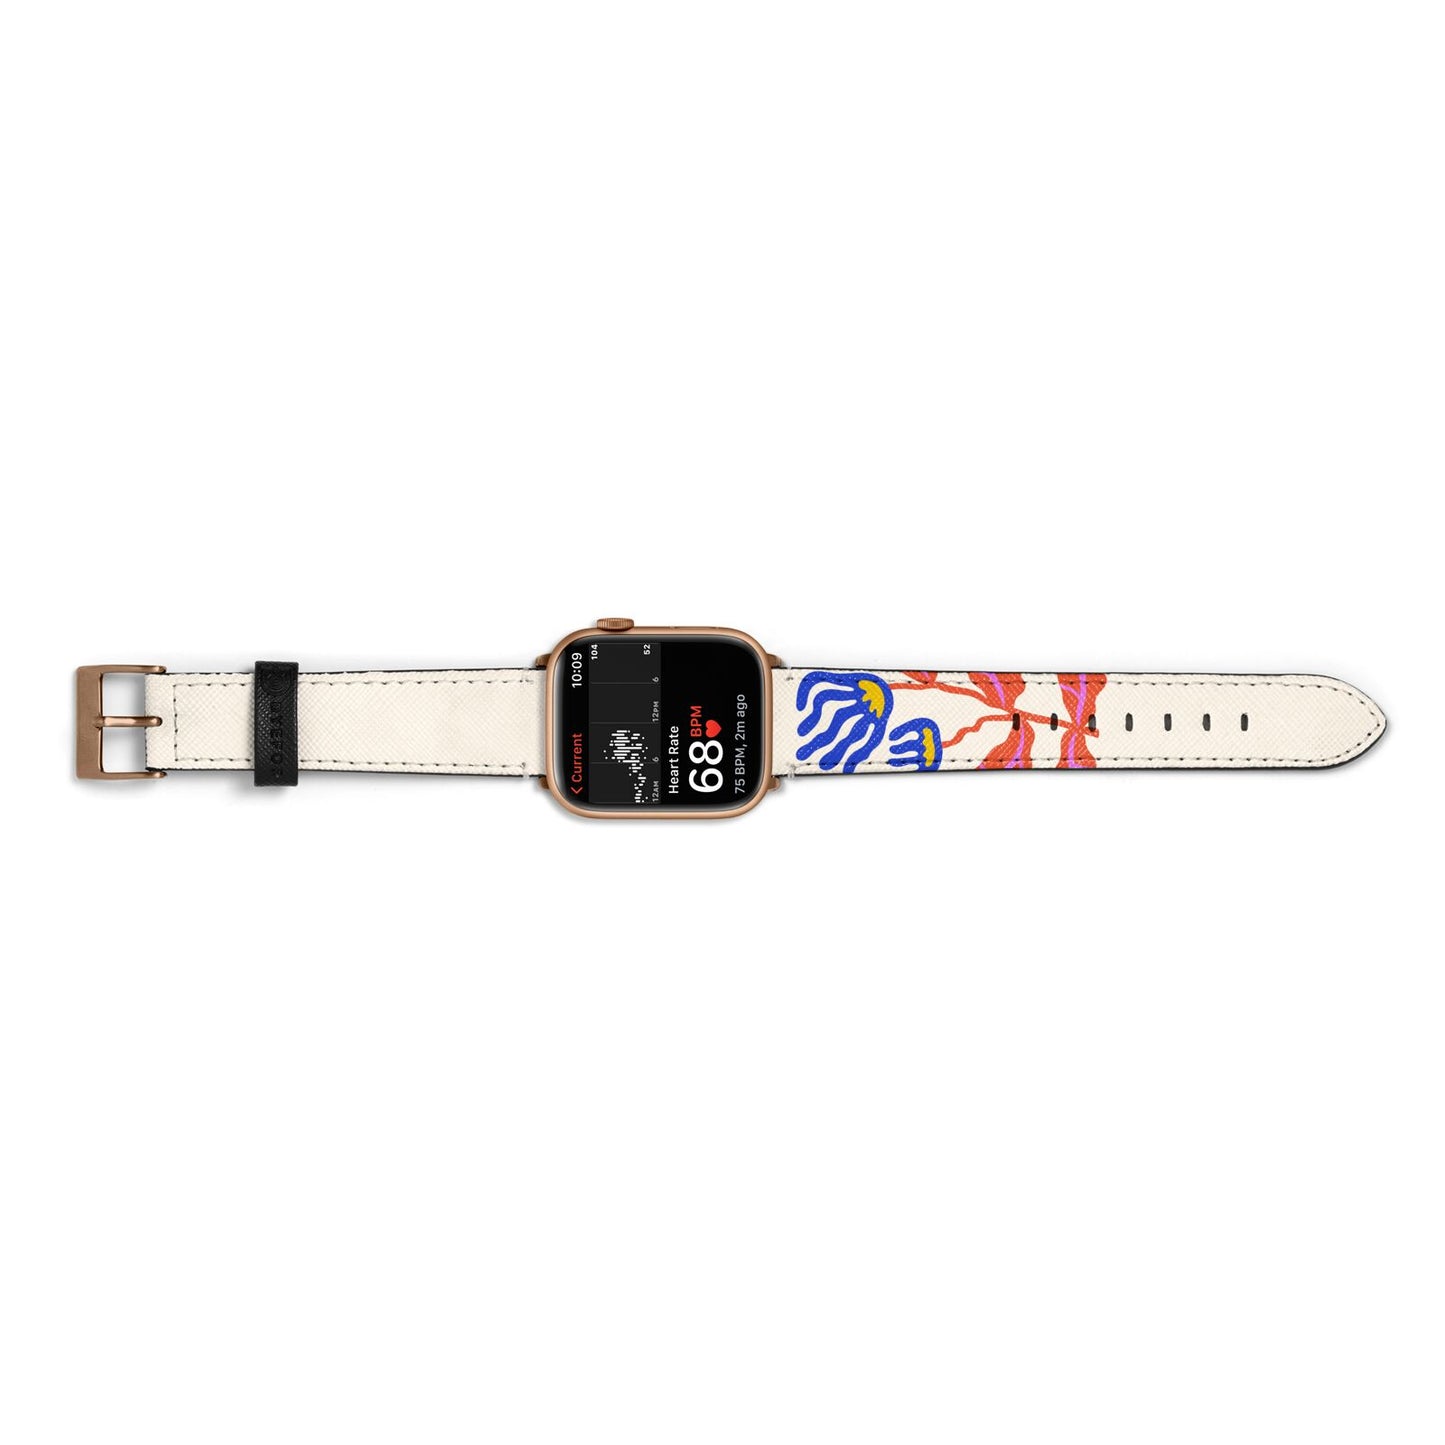 Contemporary Floral Apple Watch Strap Size 38mm Landscape Image Gold Hardware